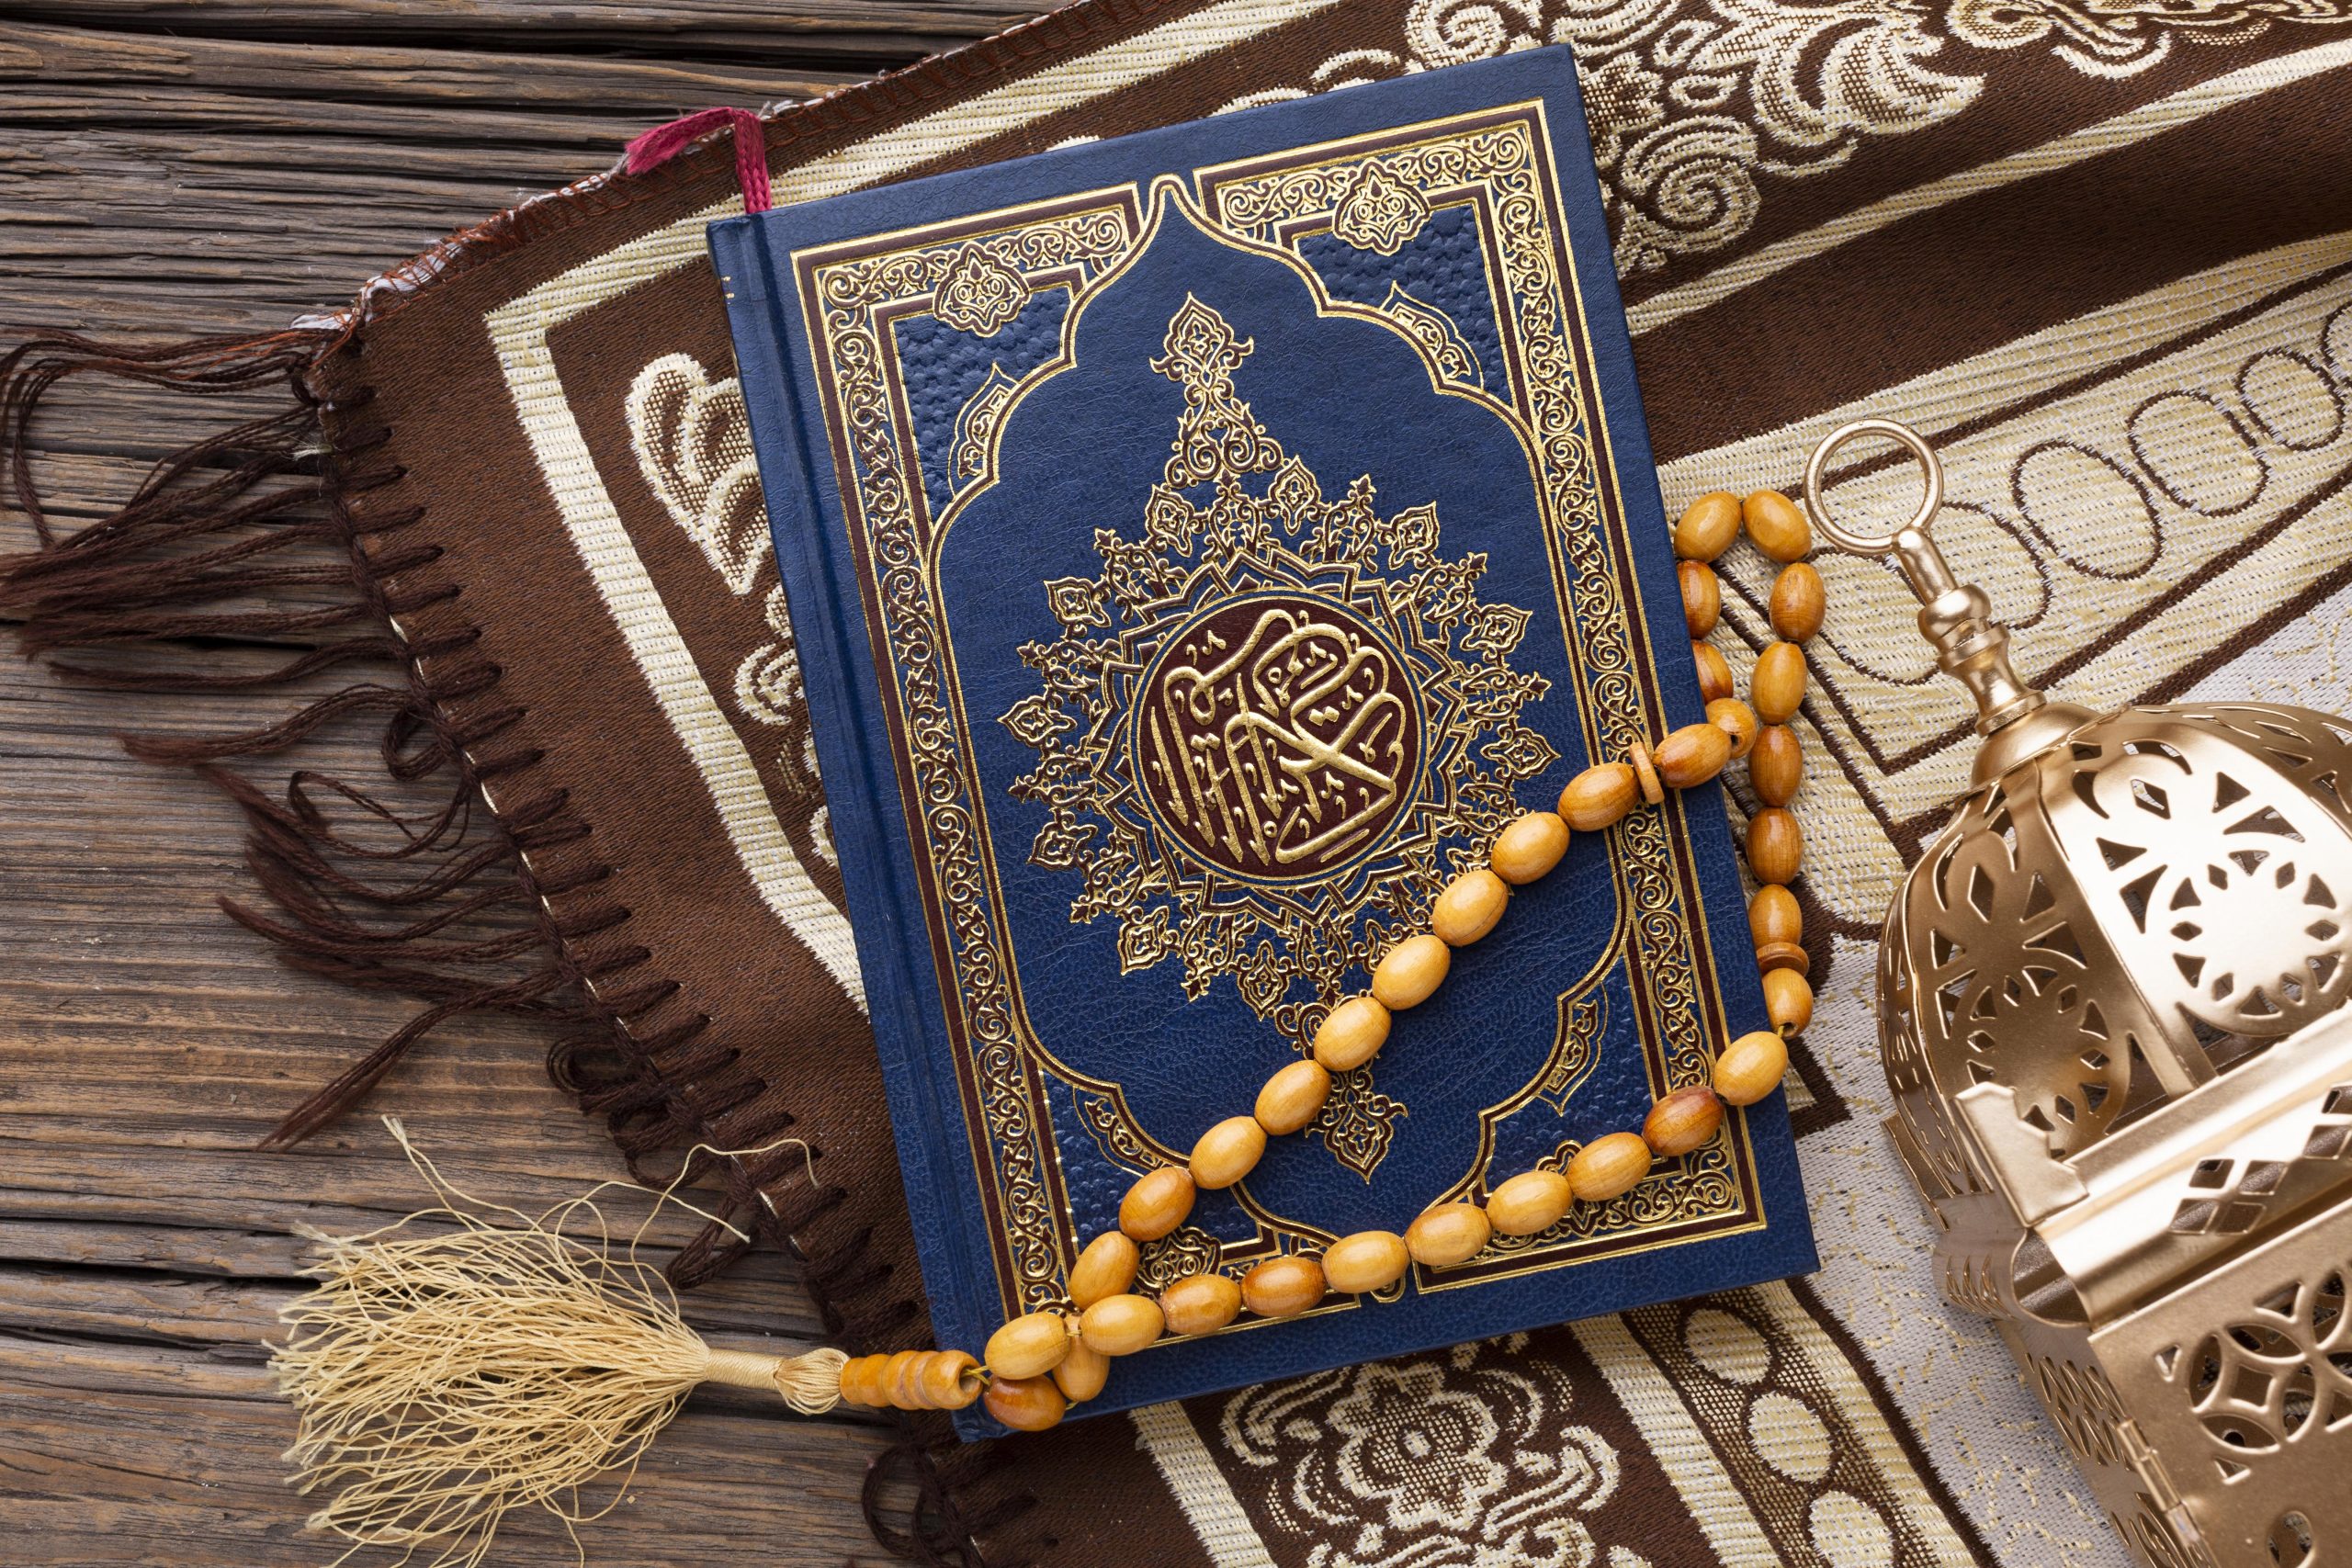 Advanced Quranic Arabic Lessons Online, the quran academy